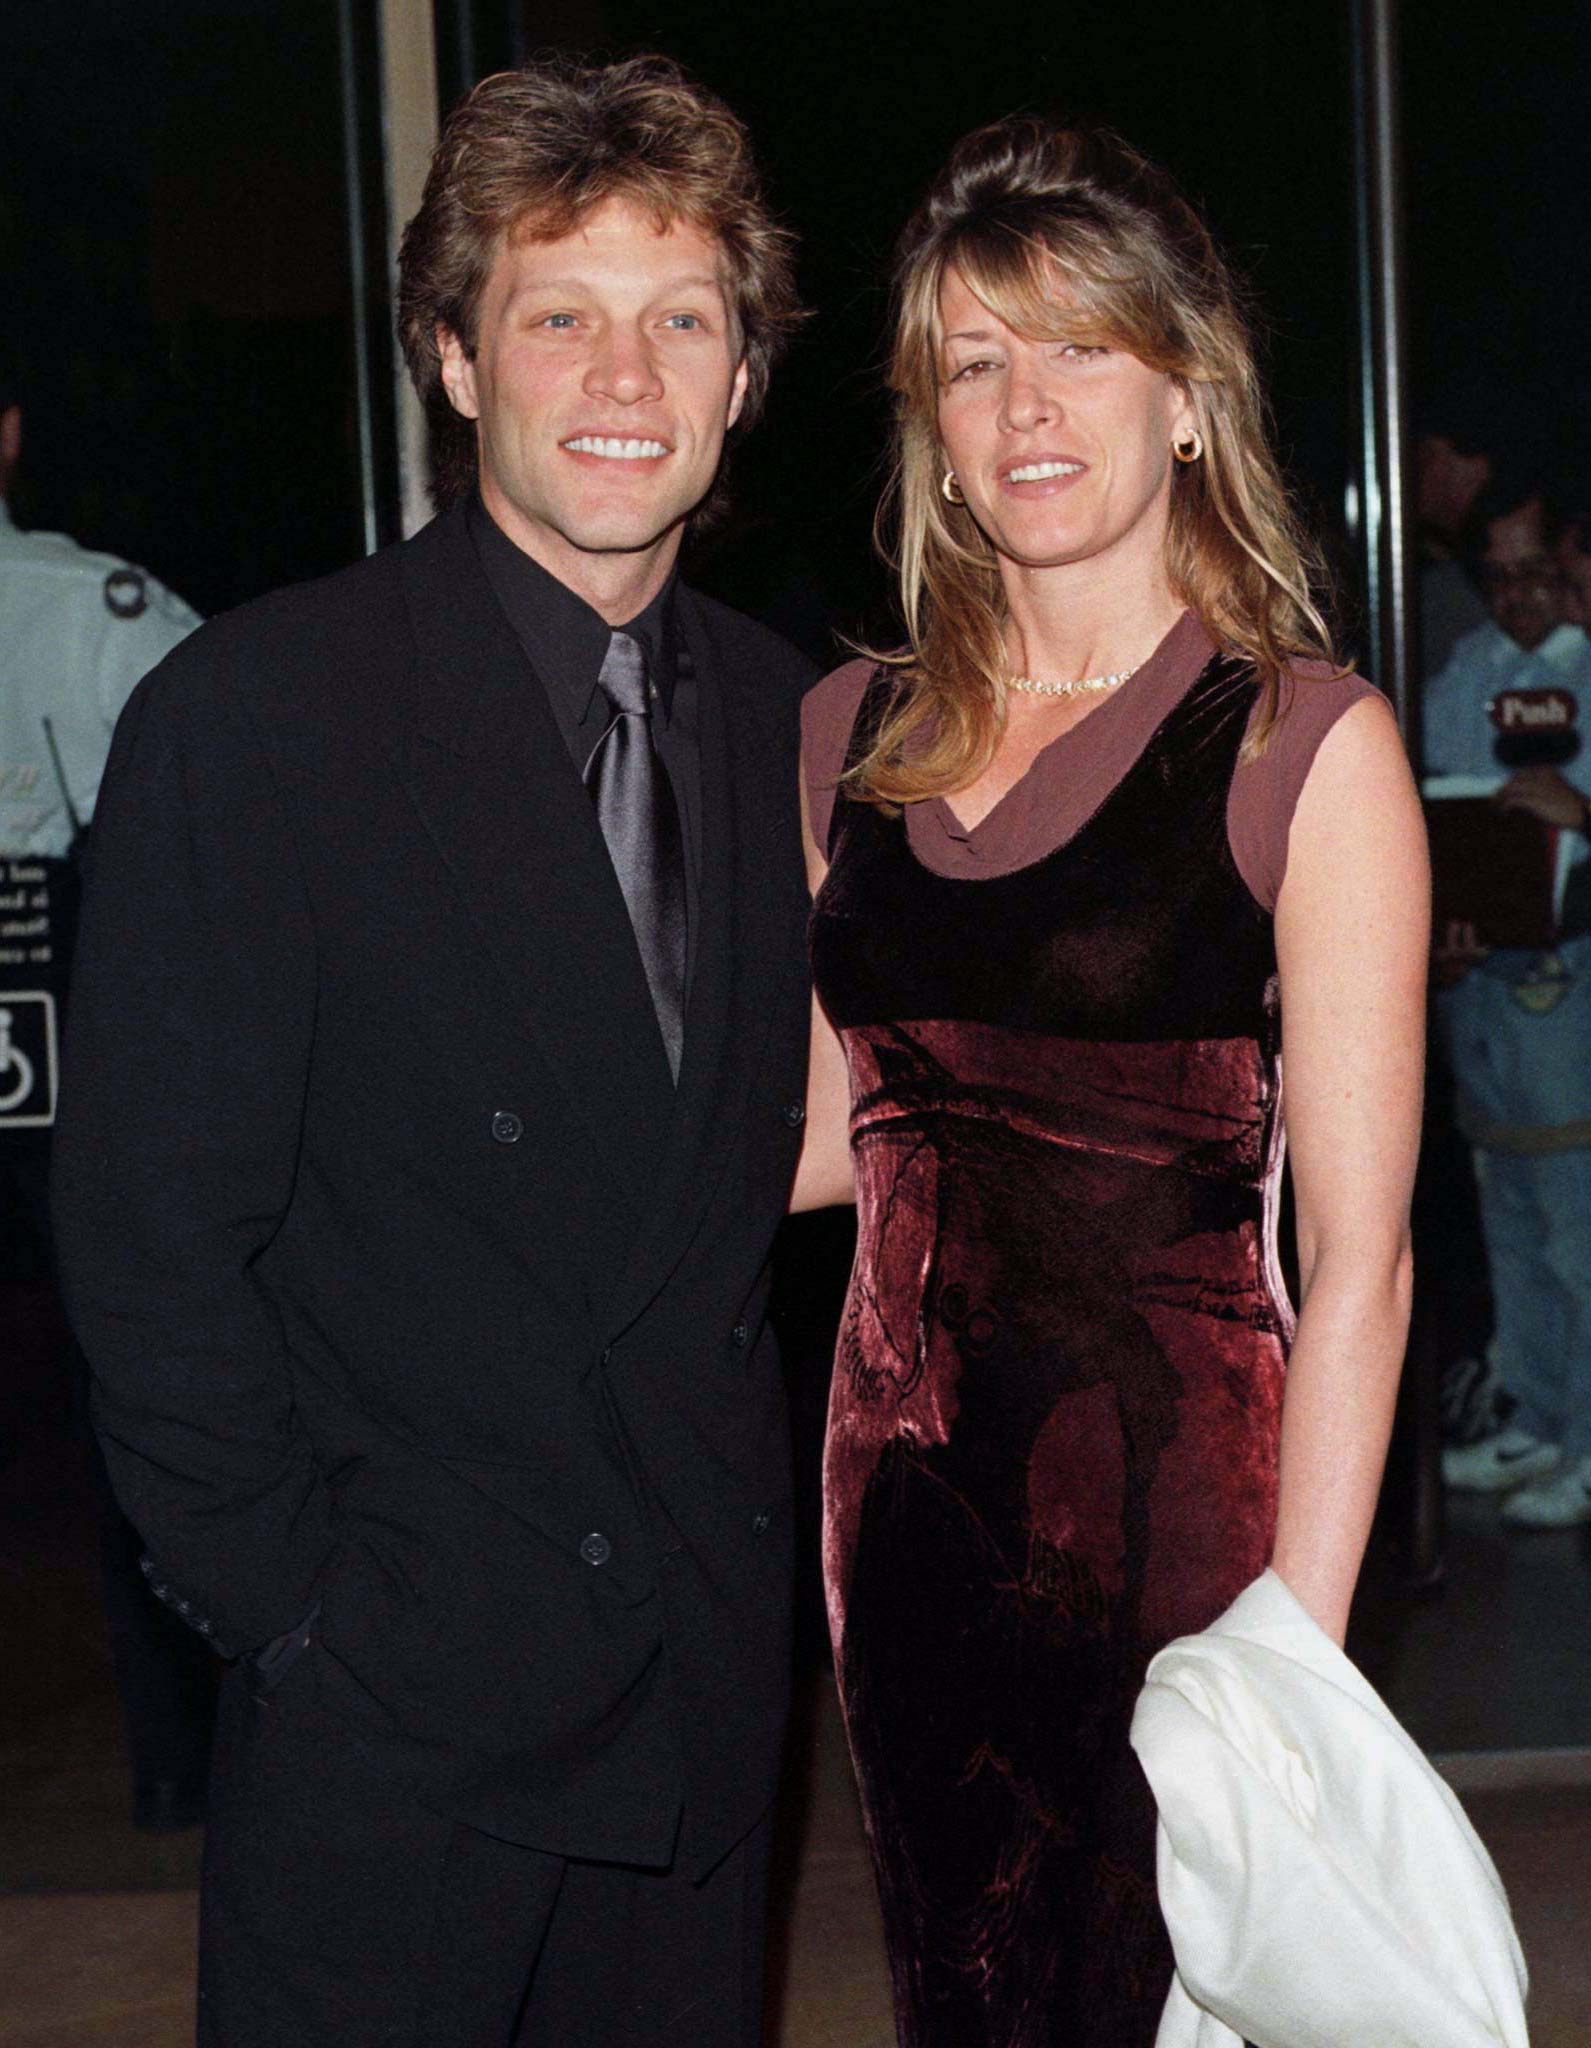 Singer Jon Bon Jovi and wife, Dorothea Hurley, arrive for the American Cinematheque's 13th Annual Moving Picture Ball, October 18 in Beverly Hills. [Actor Arnold Schwarzenegger was honored at the annual benefit roast and salute for his extraordinary achievements in the entertainment industry. Bon Jovi performed at the salute, which will be telecast October 23 on the TNT cable television network. ]